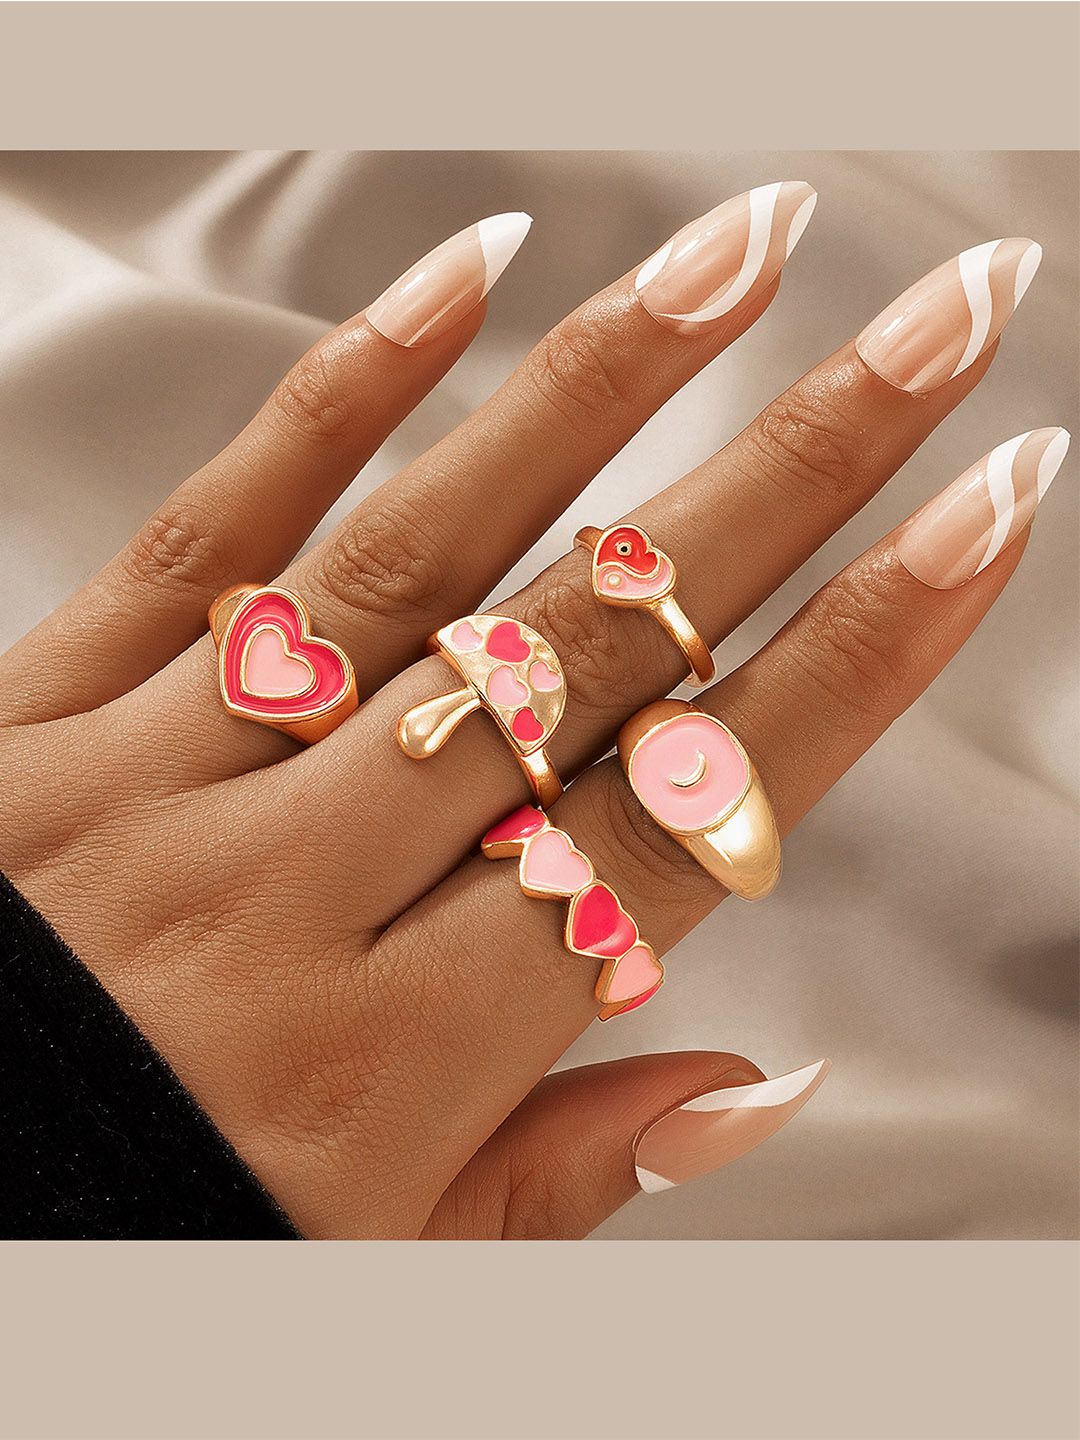 Vembley Set Of 5 Gold-Plated Pink-Colored Finger Rings Price in India